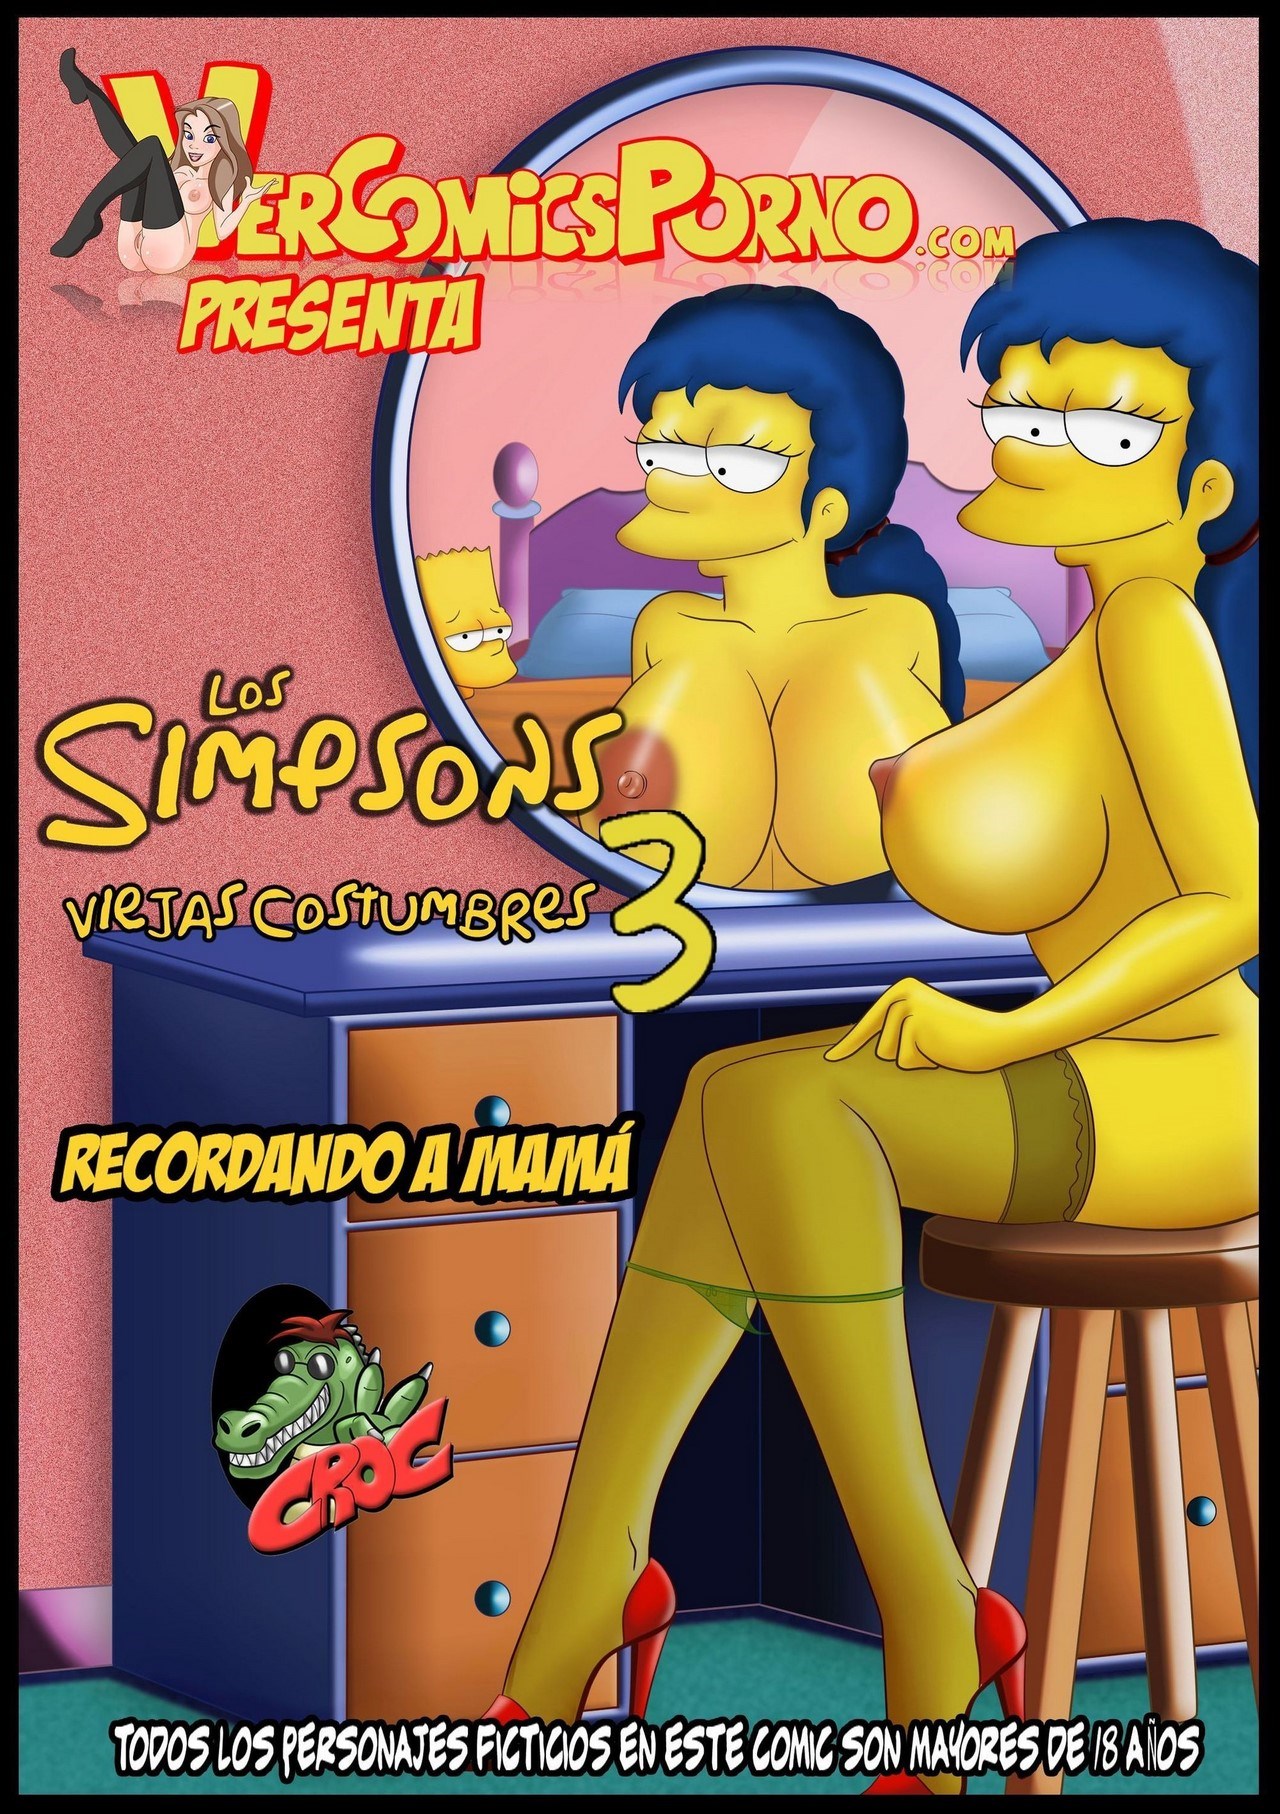 Simpsons porn comics marge and bart